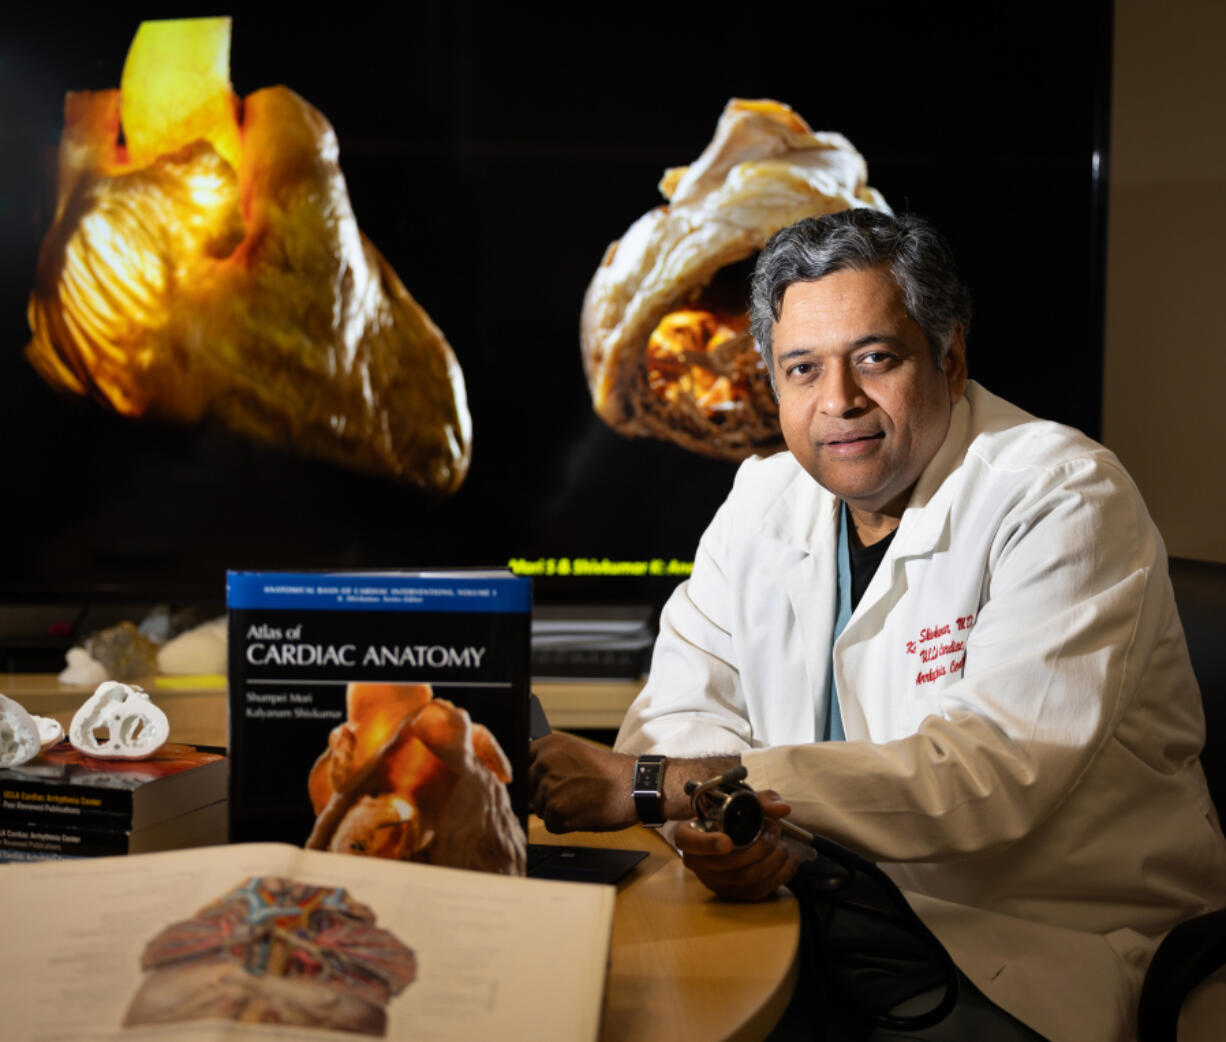 Dr. Kalyanam Shivkumar, professor of medicine with the UCLA Cardiac Arrhythmia Center, shown with his book book titled &ldquo;Atlas of Cardiac Anatomy&rdquo; and a book by Dr. Eduard Pernkopf, an ardent Nazi whose anatomical book was drawn off the bodies of executed prisoners, shown in foreground, May 9, 2024. (Allen J.